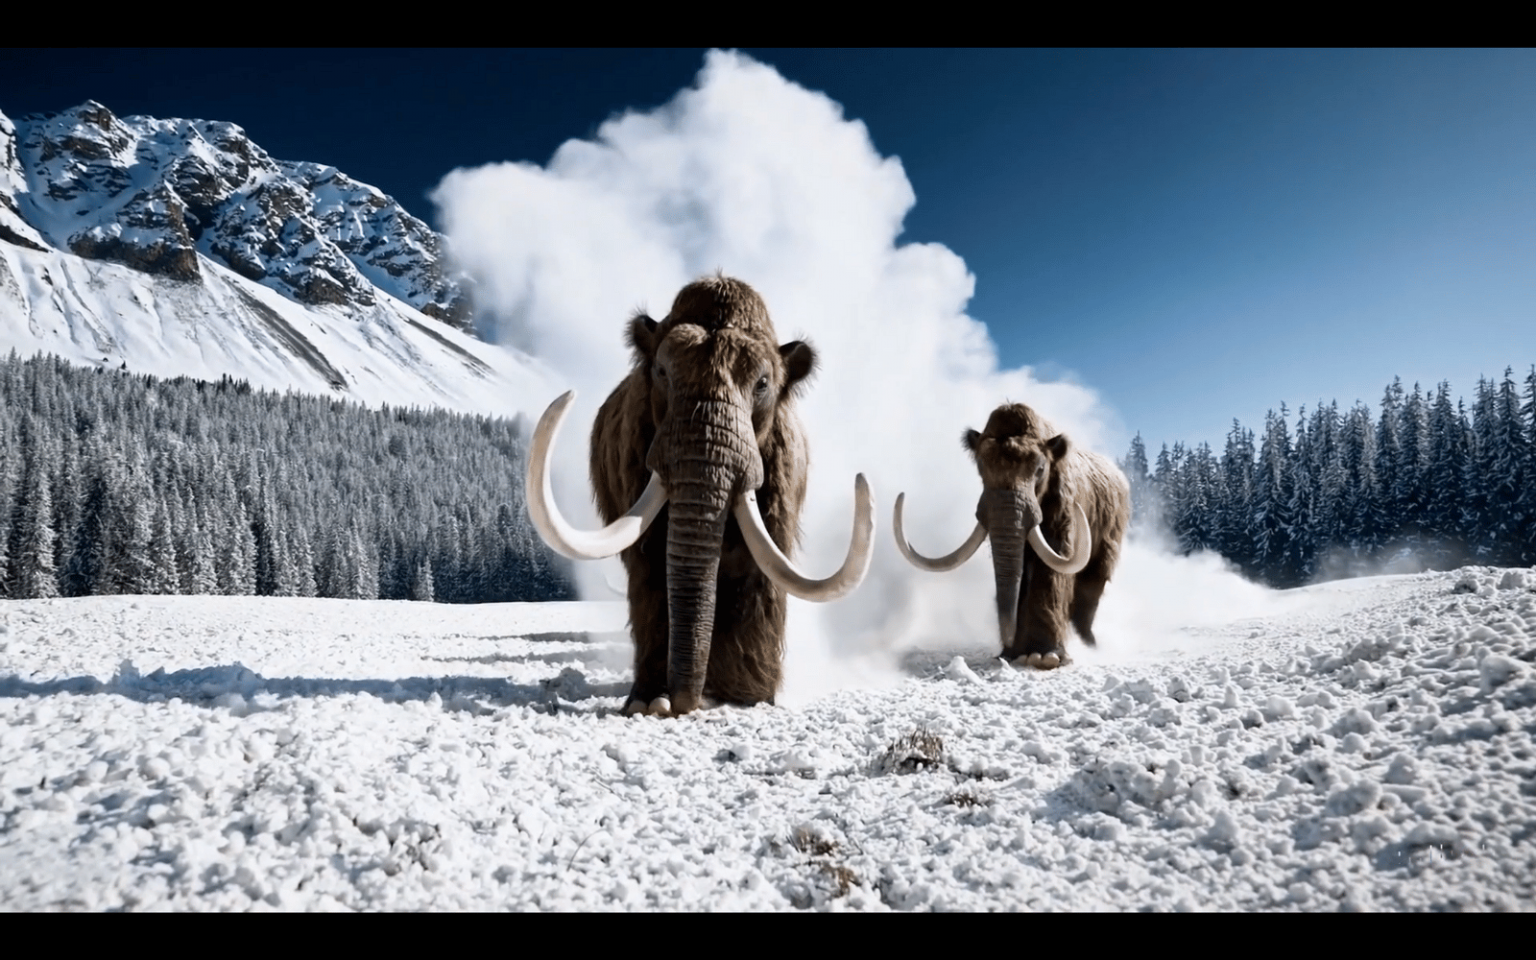 Sora-generated wooly mammoths approaching the camera